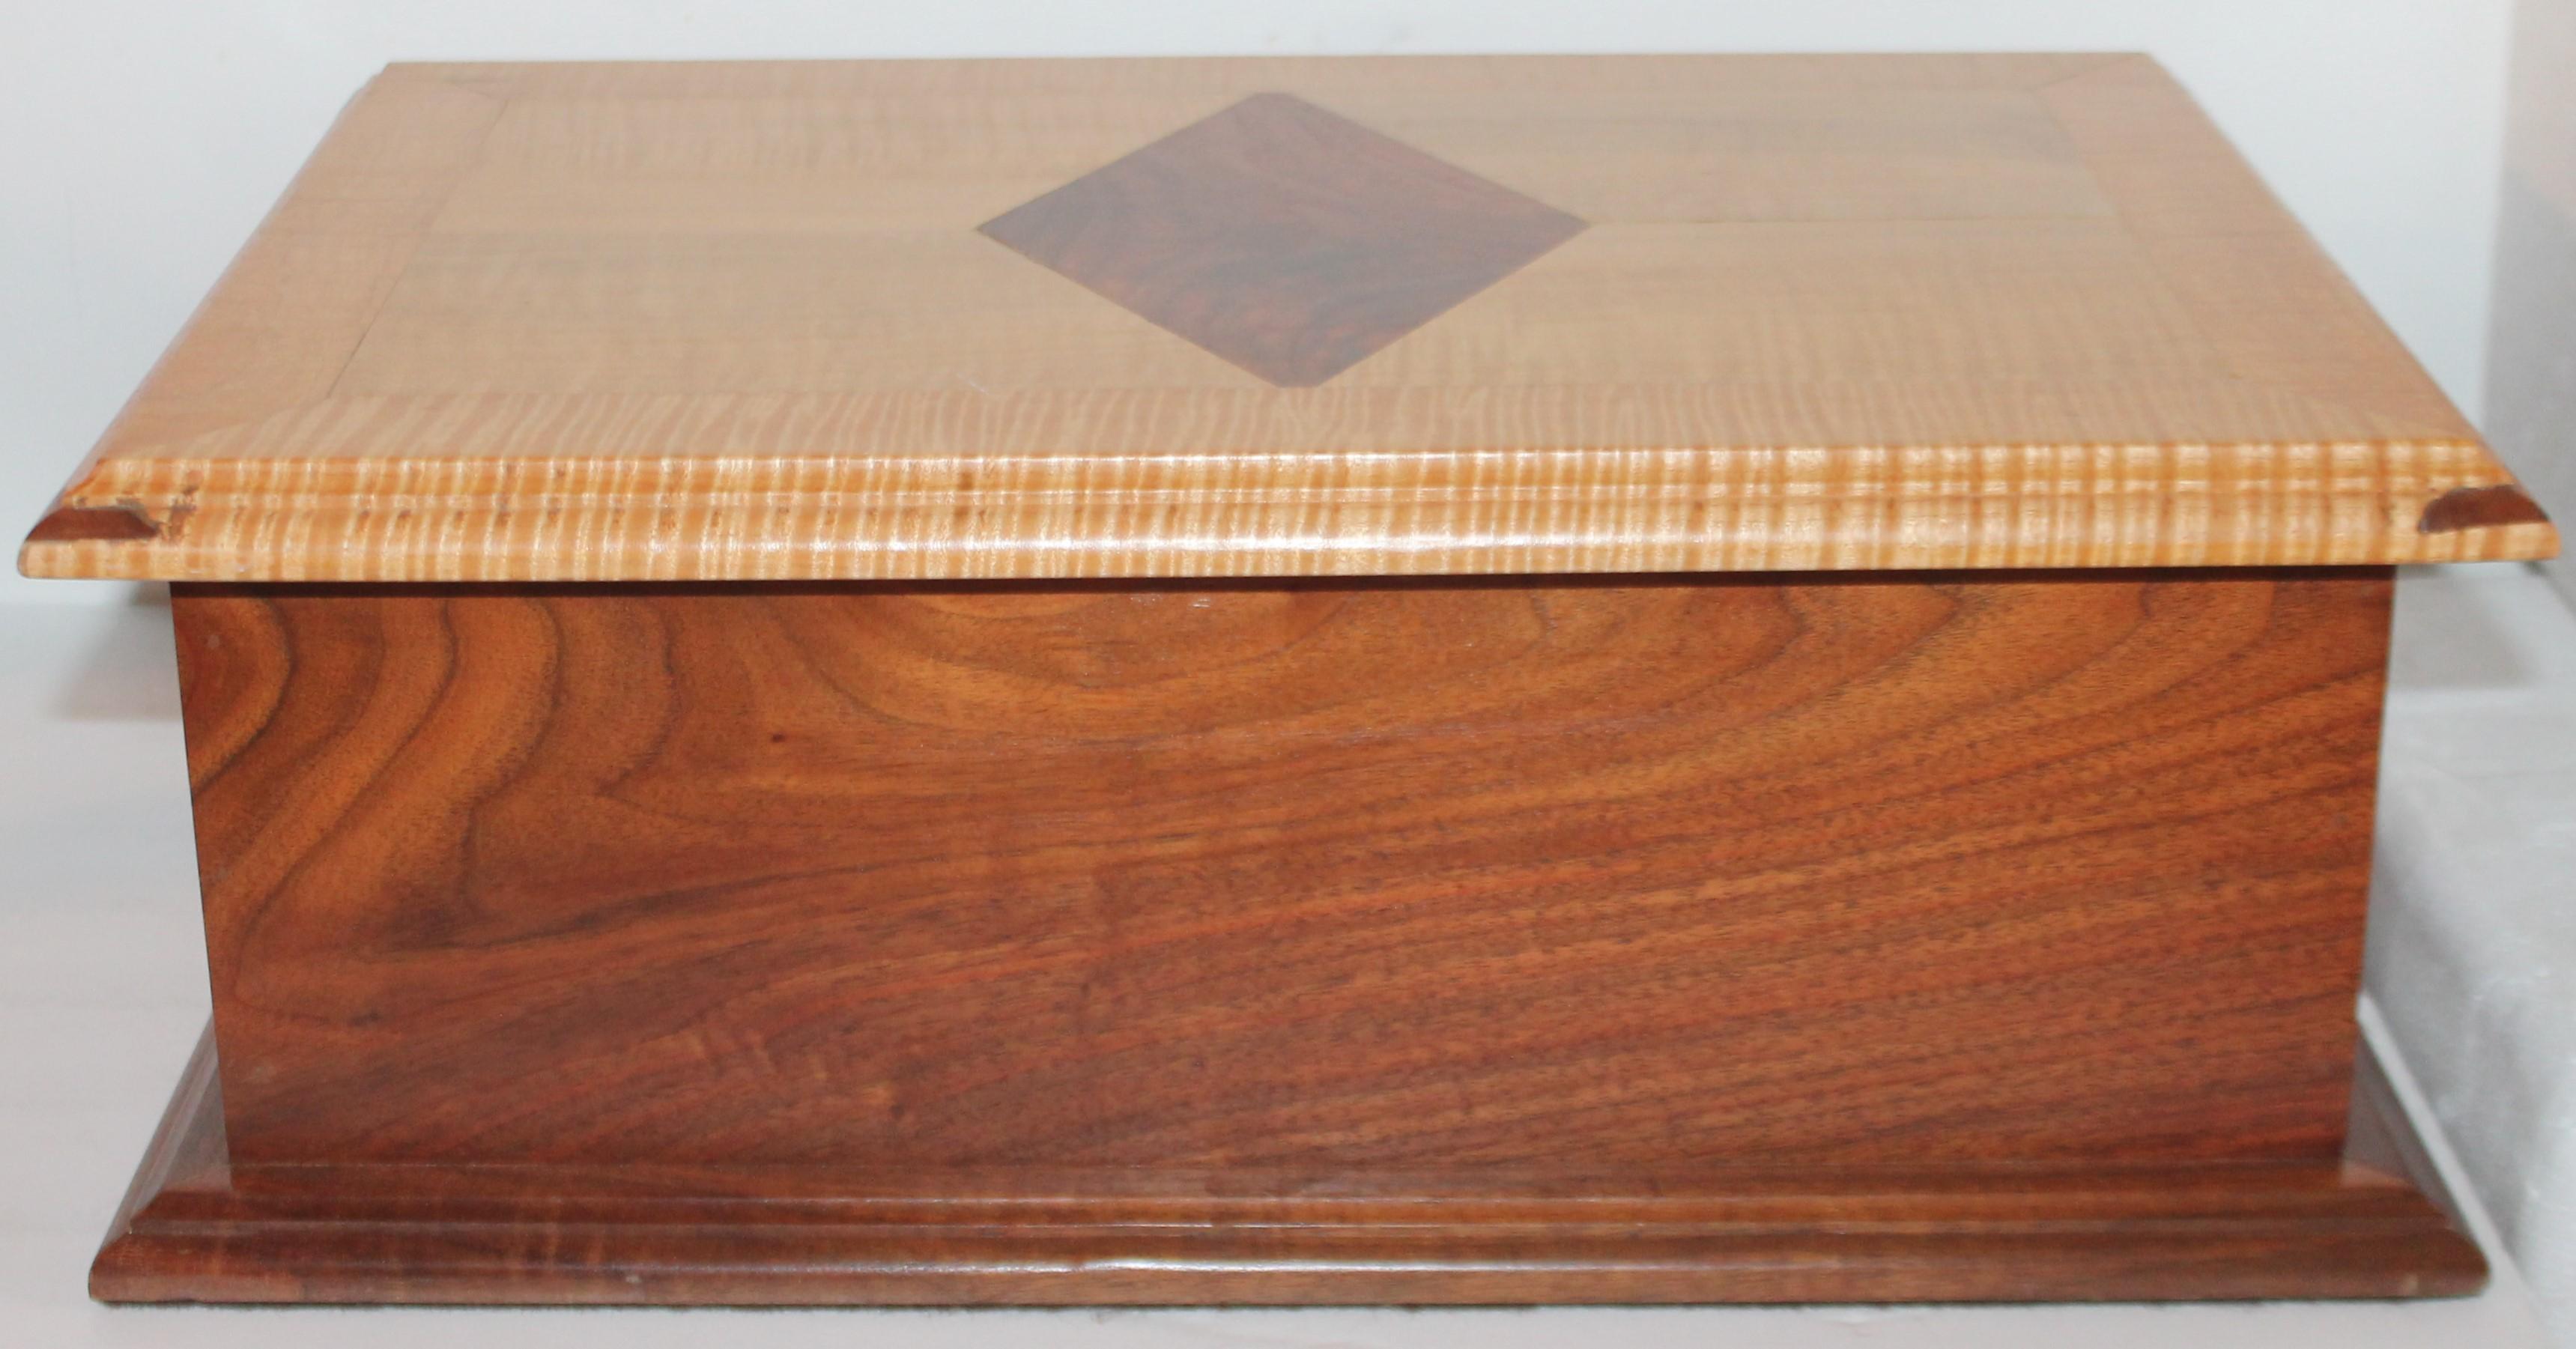 Handmade walnut and tiger eye maple silver chest with drawer. This is more contemporary handmade chest with a lift top.